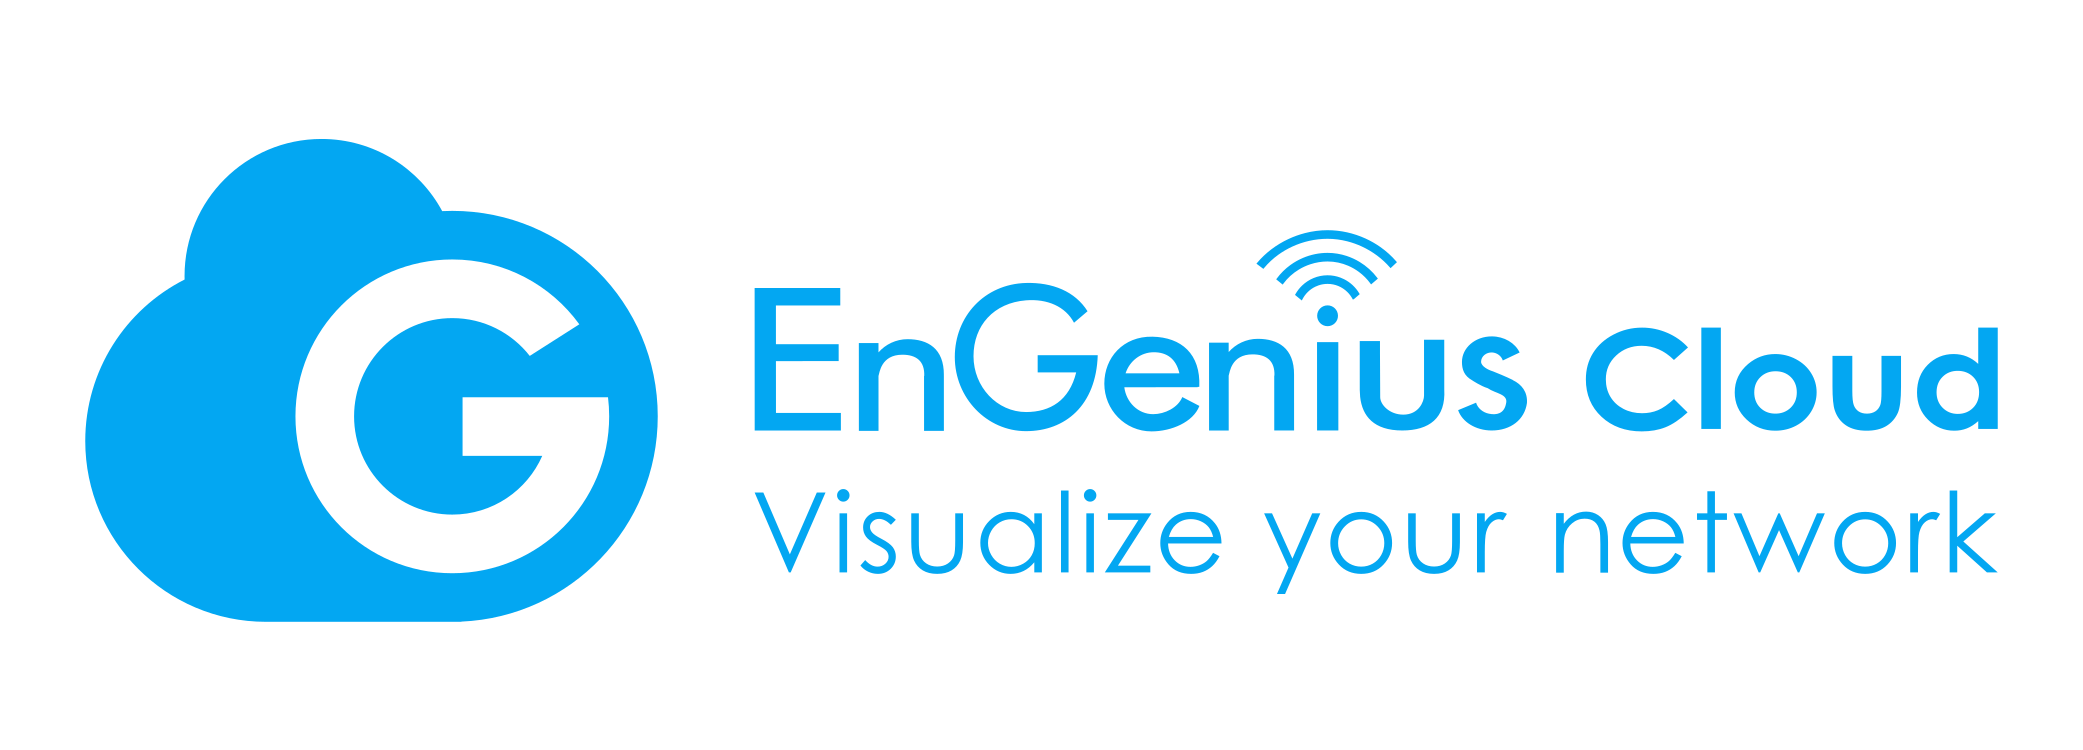 Engenius visualize your network